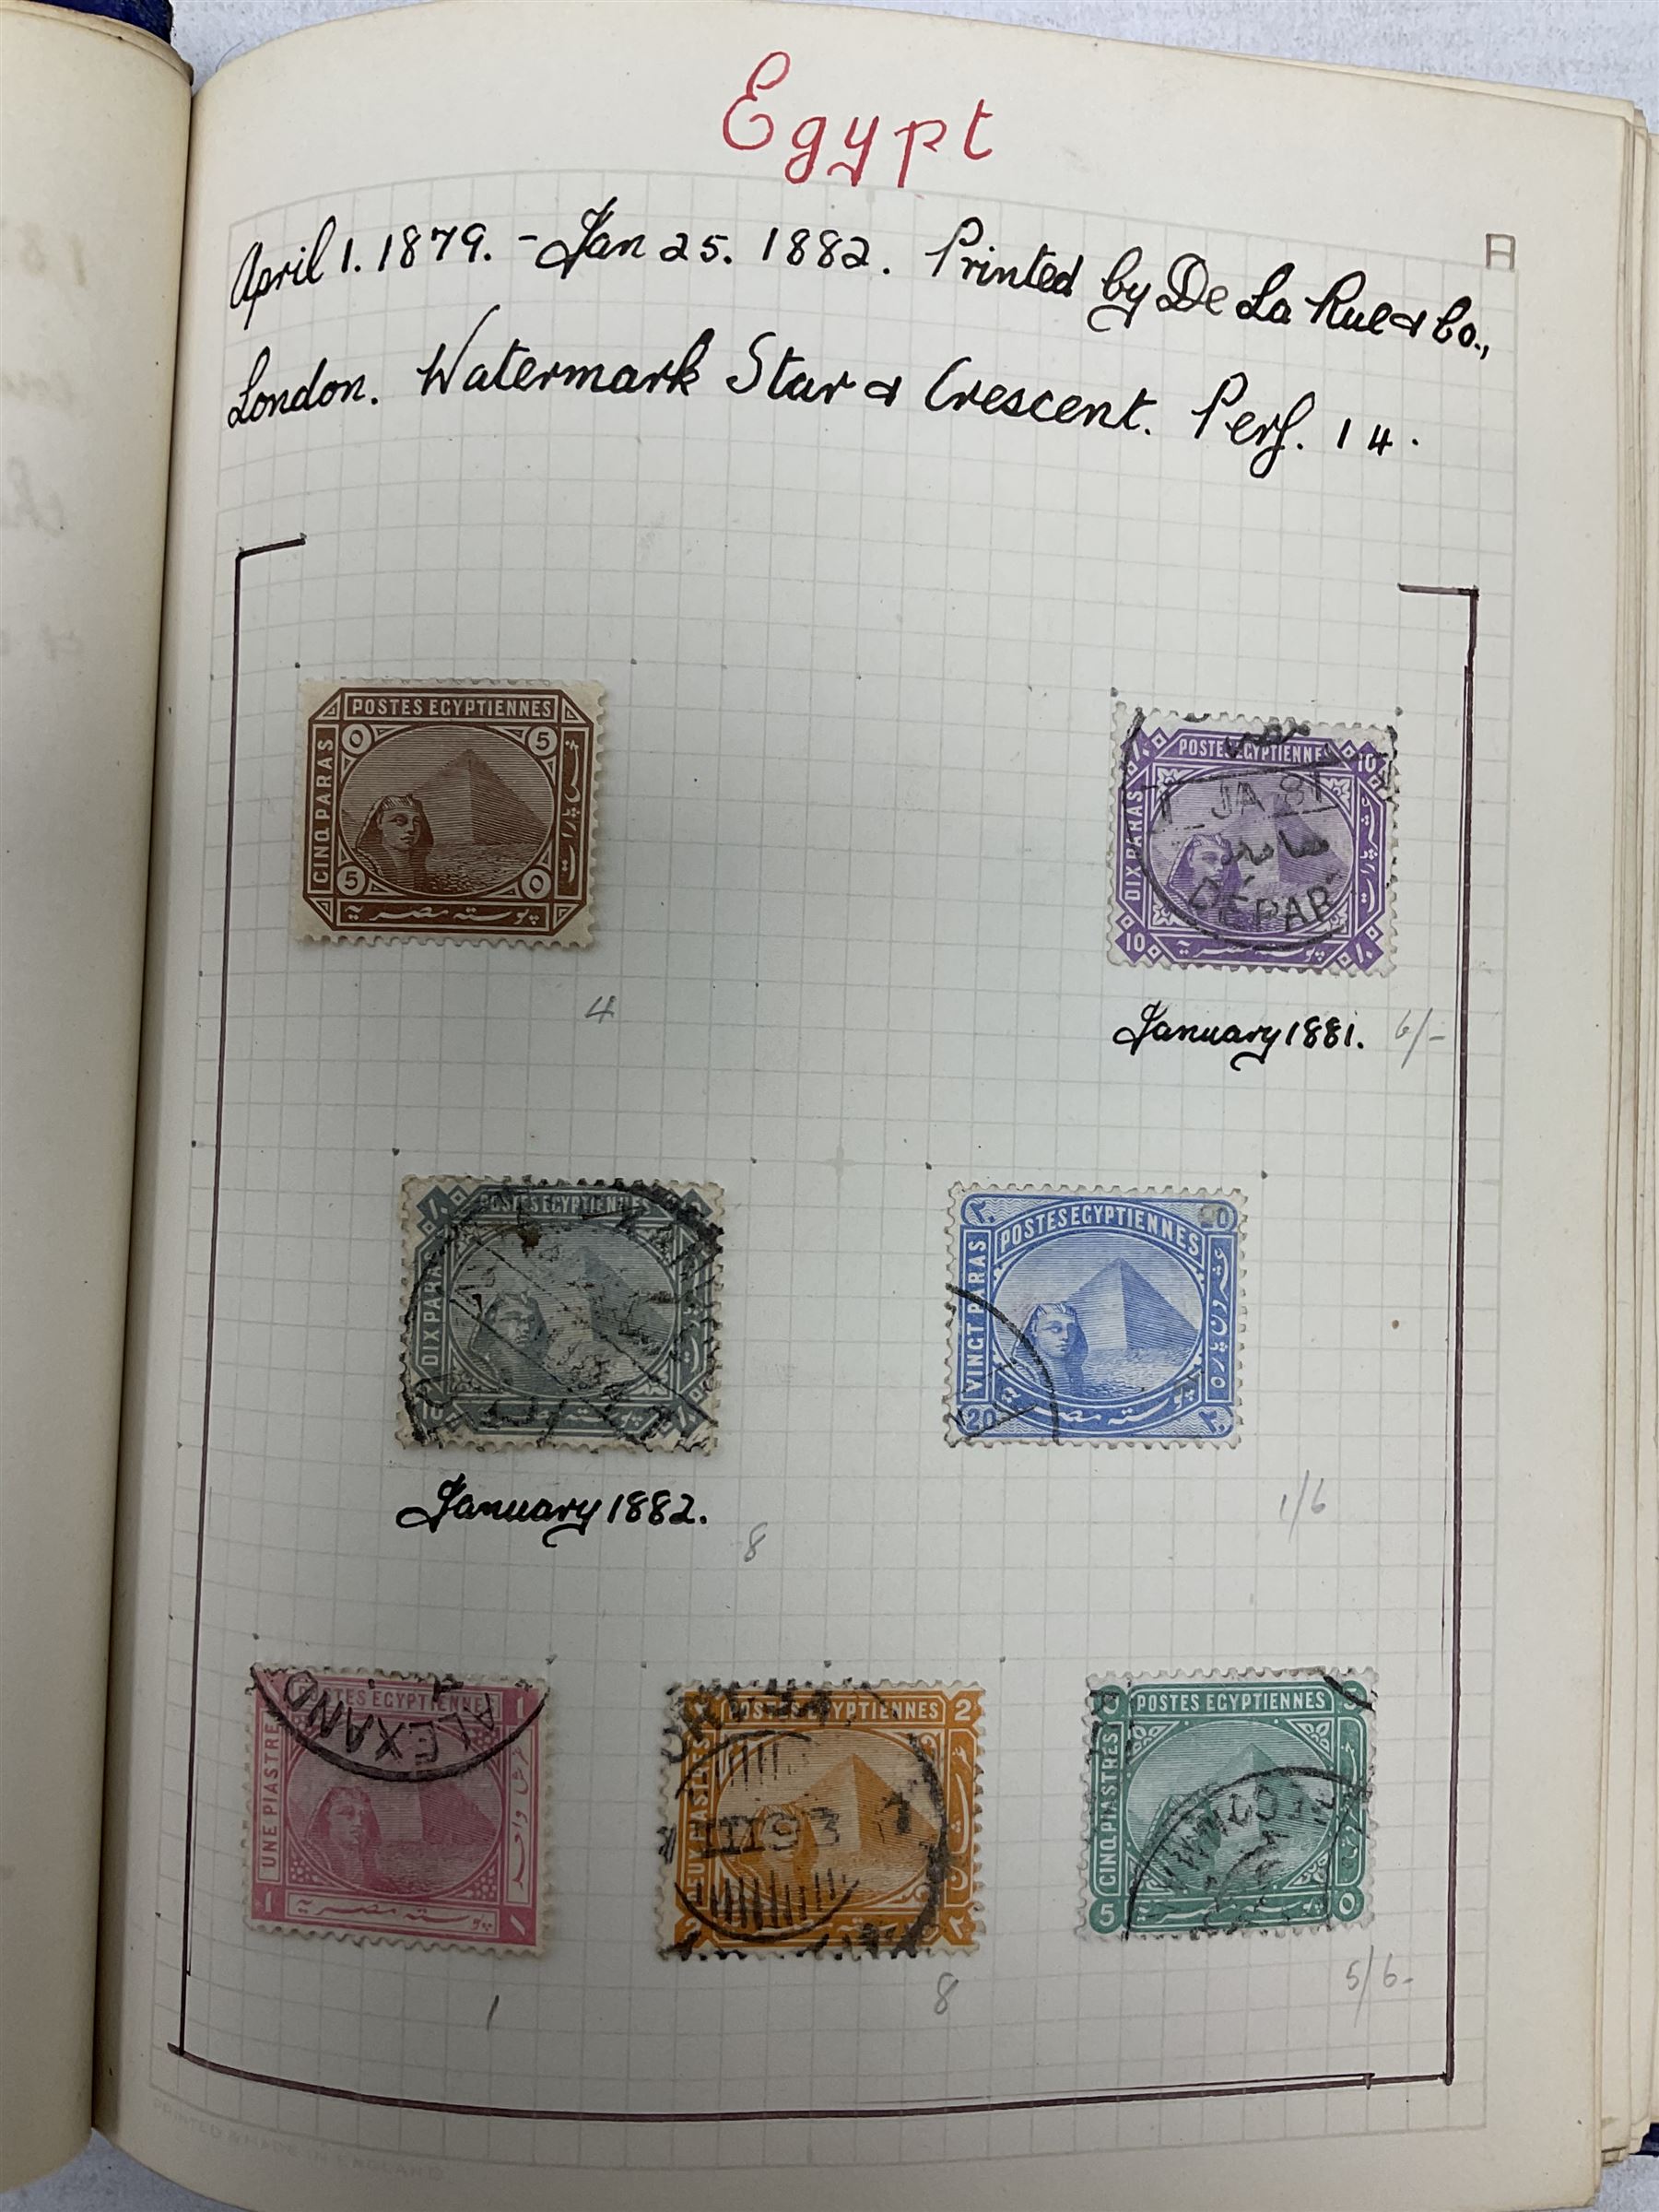 Egypt 1866 and later stamps - Image 127 of 761